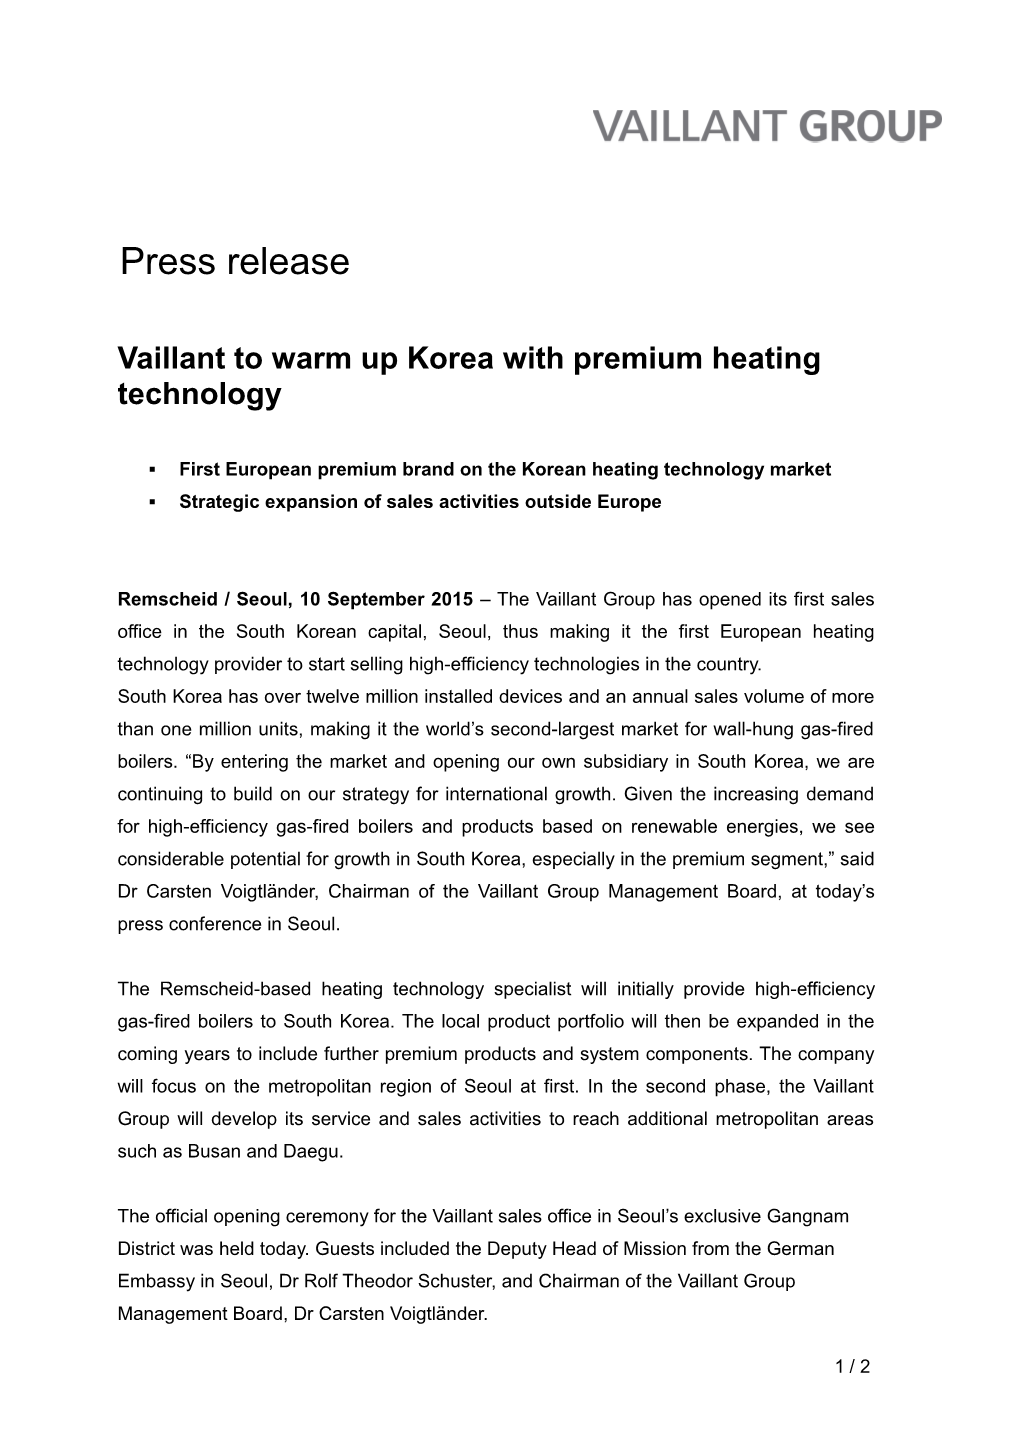 Vaillant to Warm up Korea with Premium Heating Technology